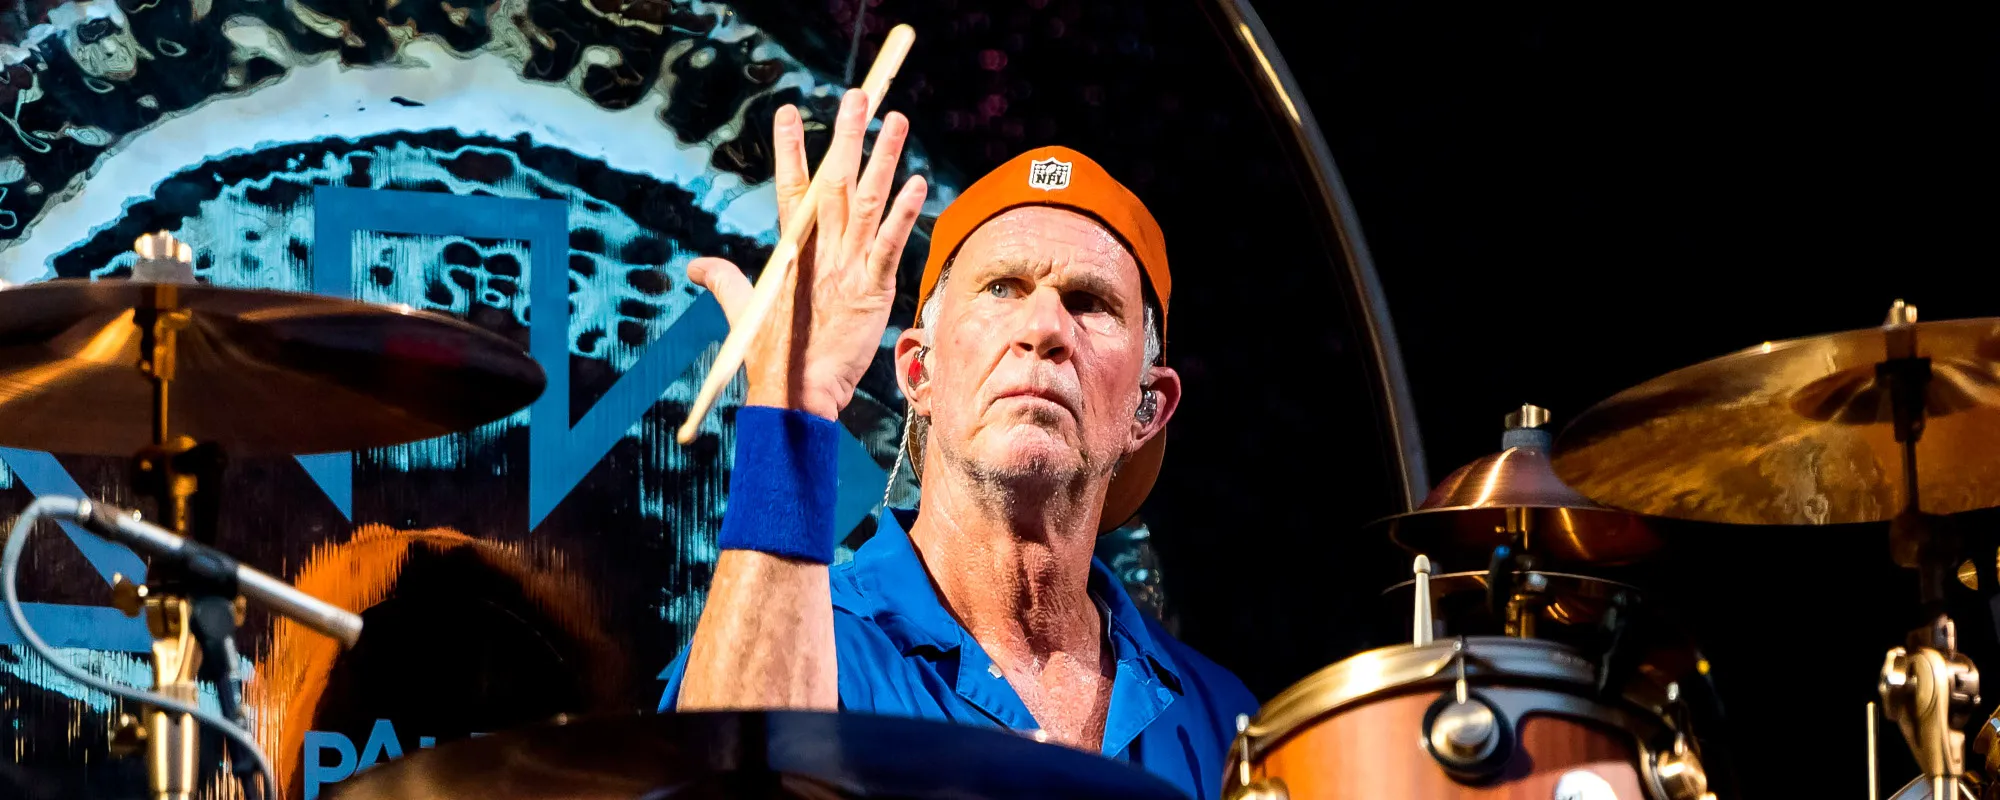 4 Songs You Didn’t Know Chad Smith Wrote for Red Hot Chili Peppers